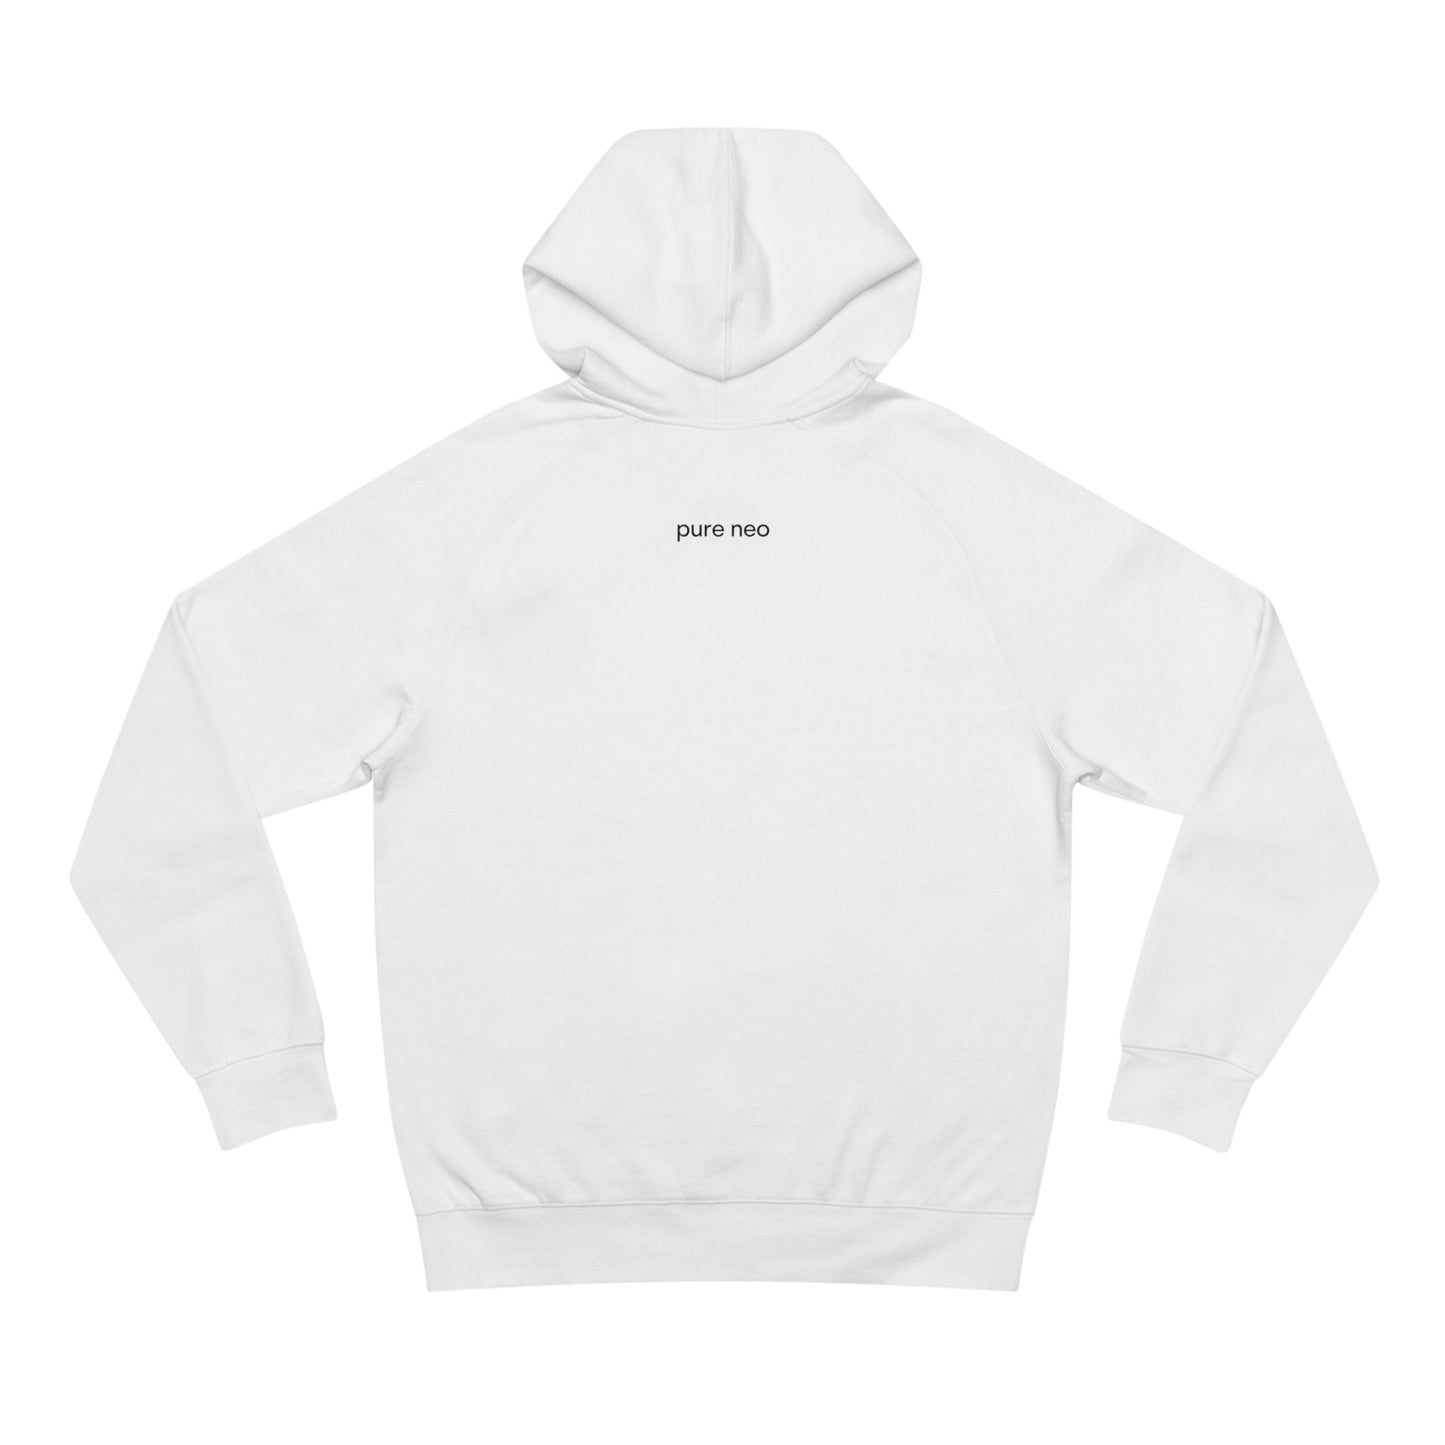 Hifi reviewers have no professional listening rooms hoodie - Pure Neo Shop